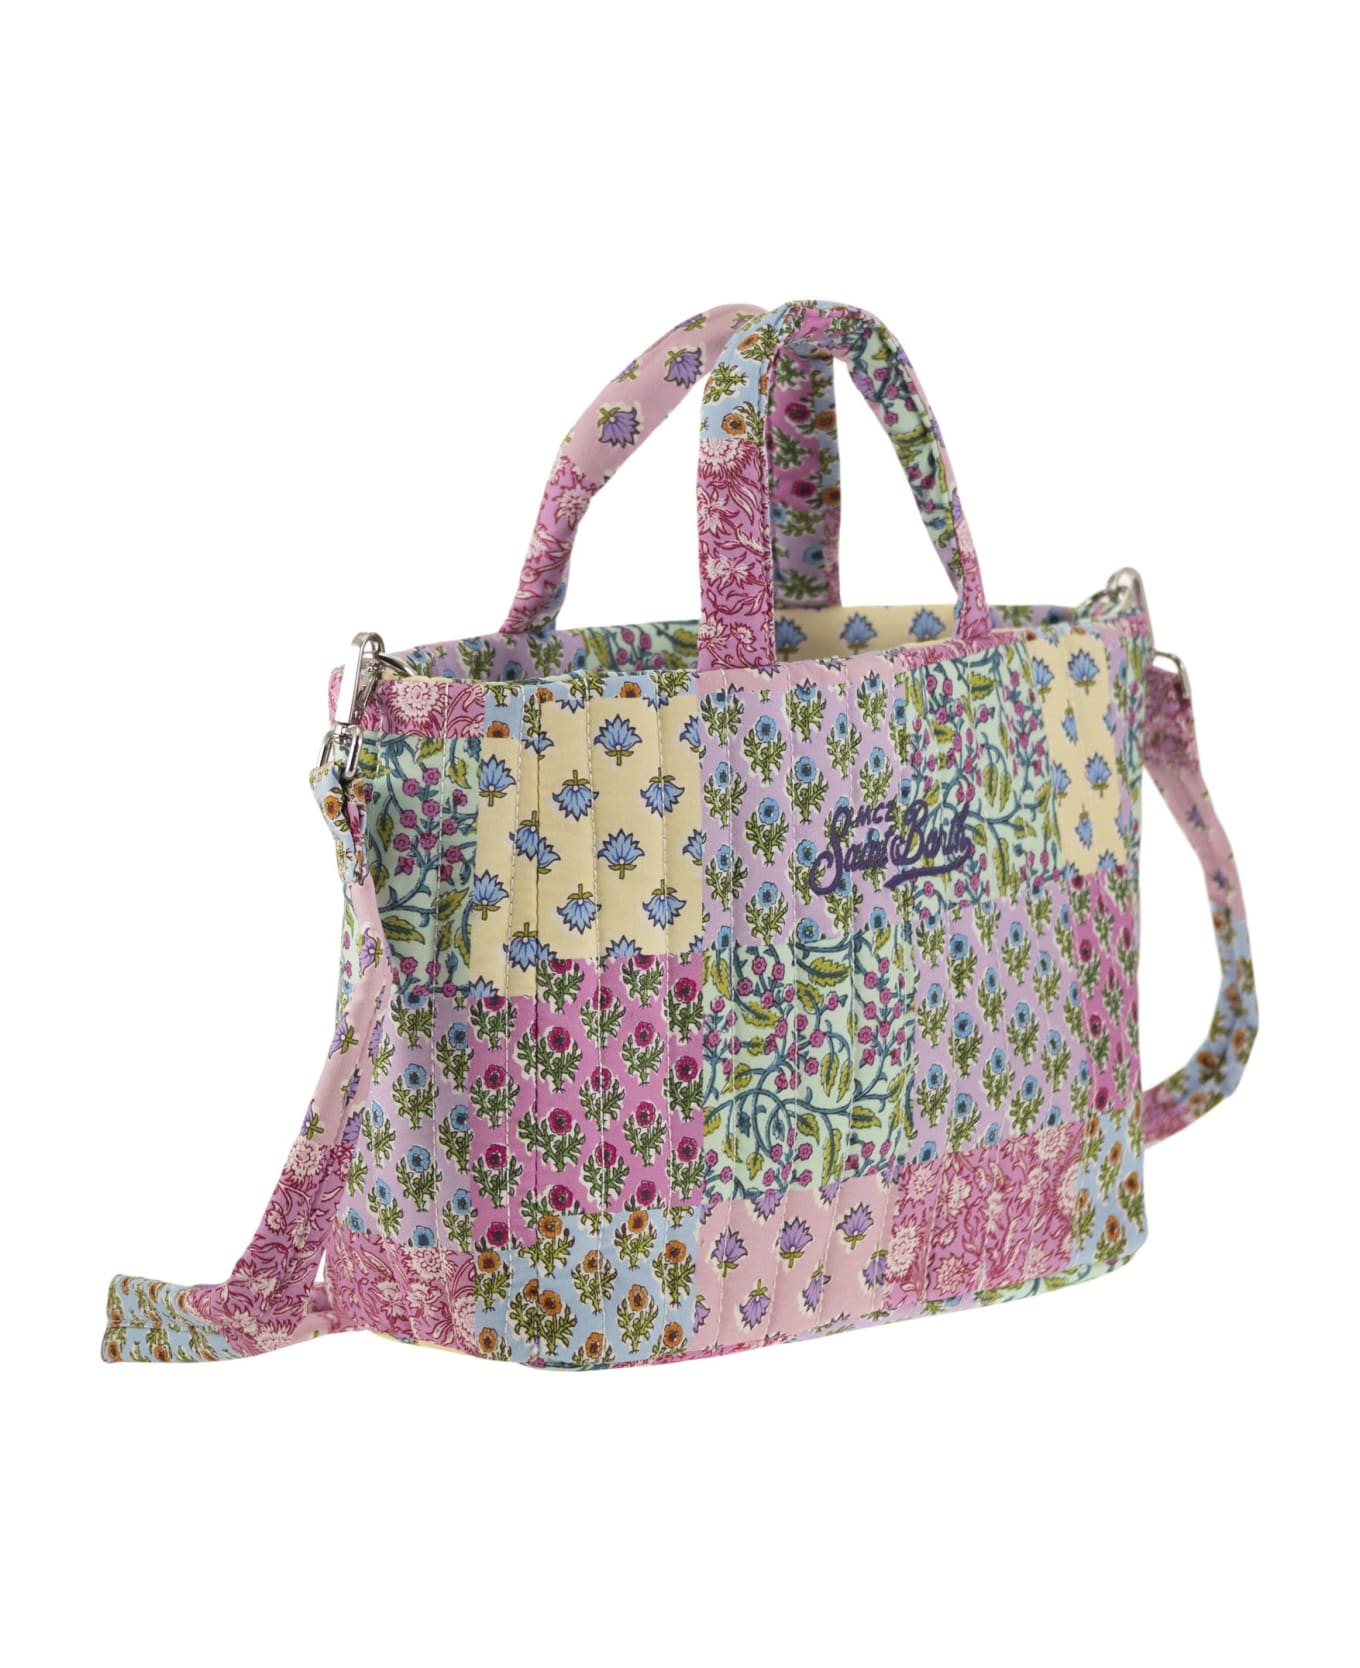 MC2 Saint Barth Soft Tote Mid Quilted Bag With Flowers - Multicolor